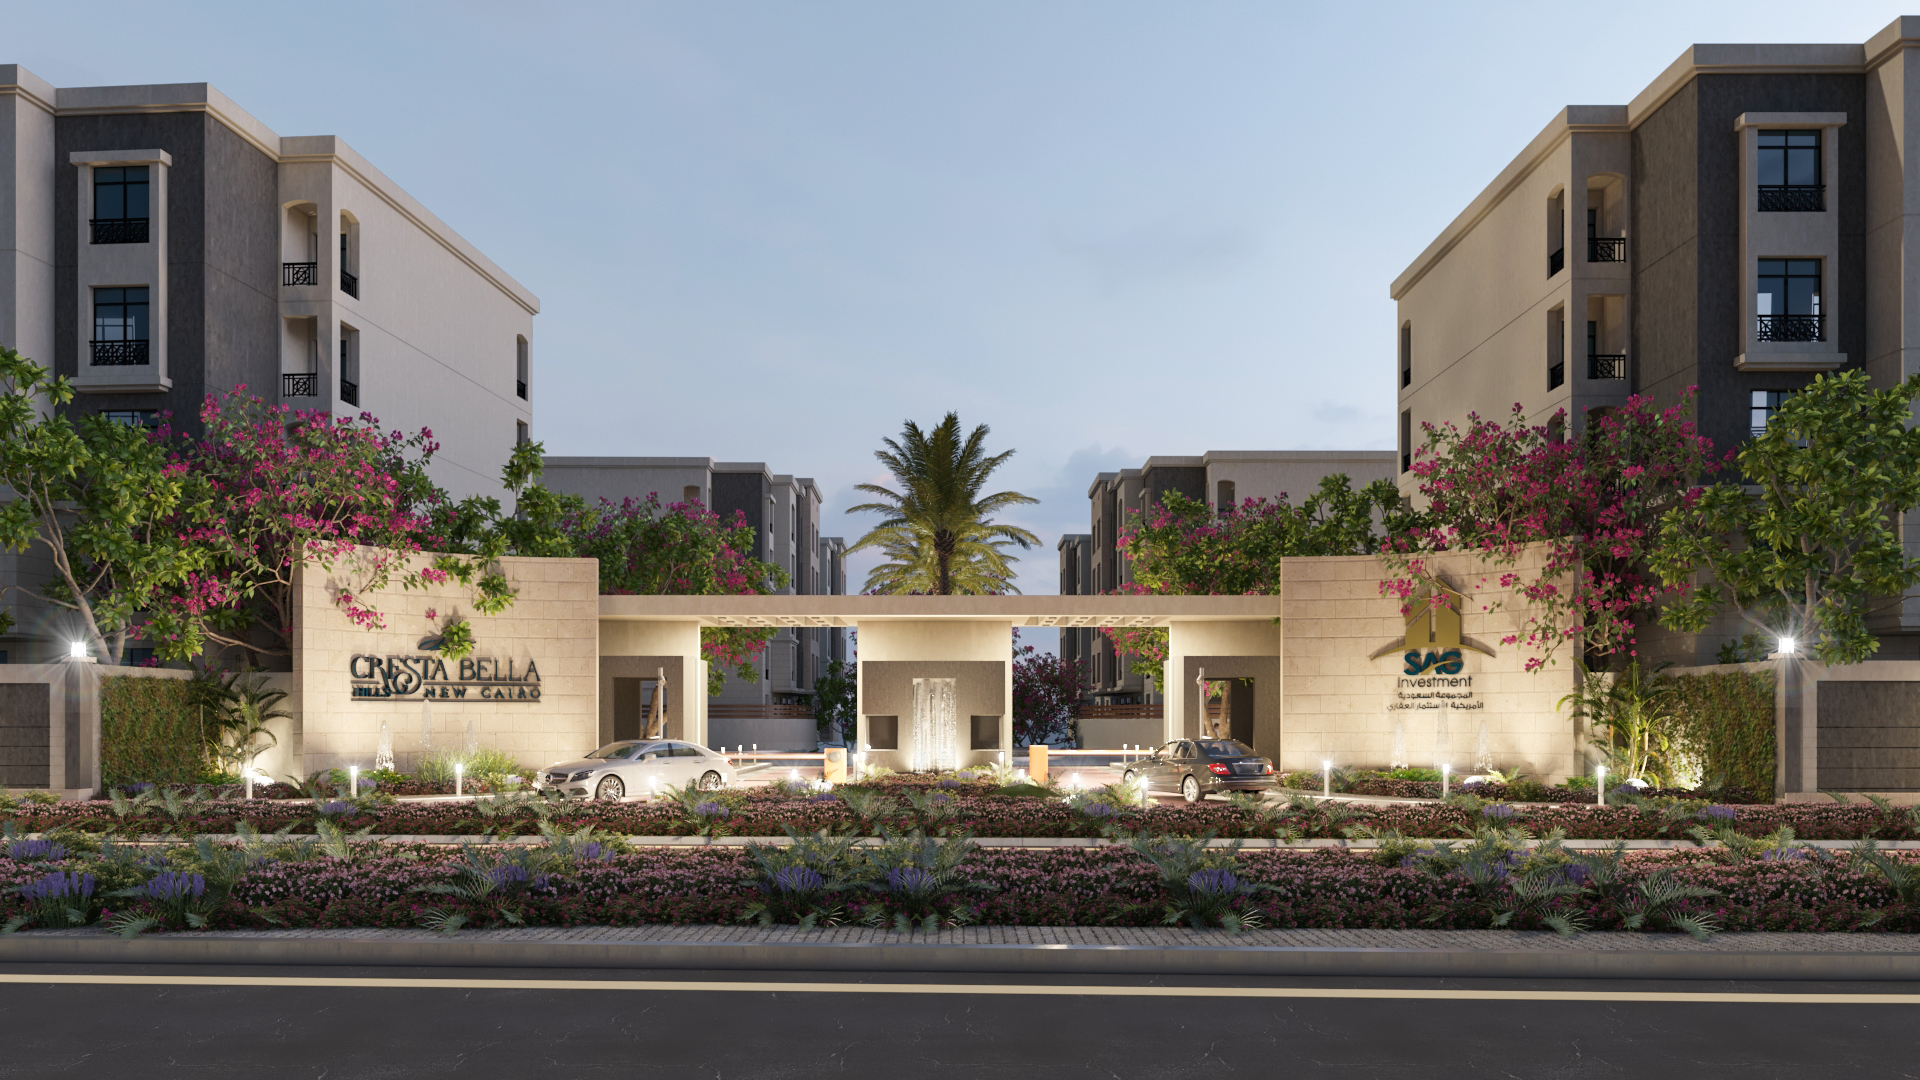 Hurry up to book your apartment now in one of the projects of the Saudi American Company, Cresta Bella Hills